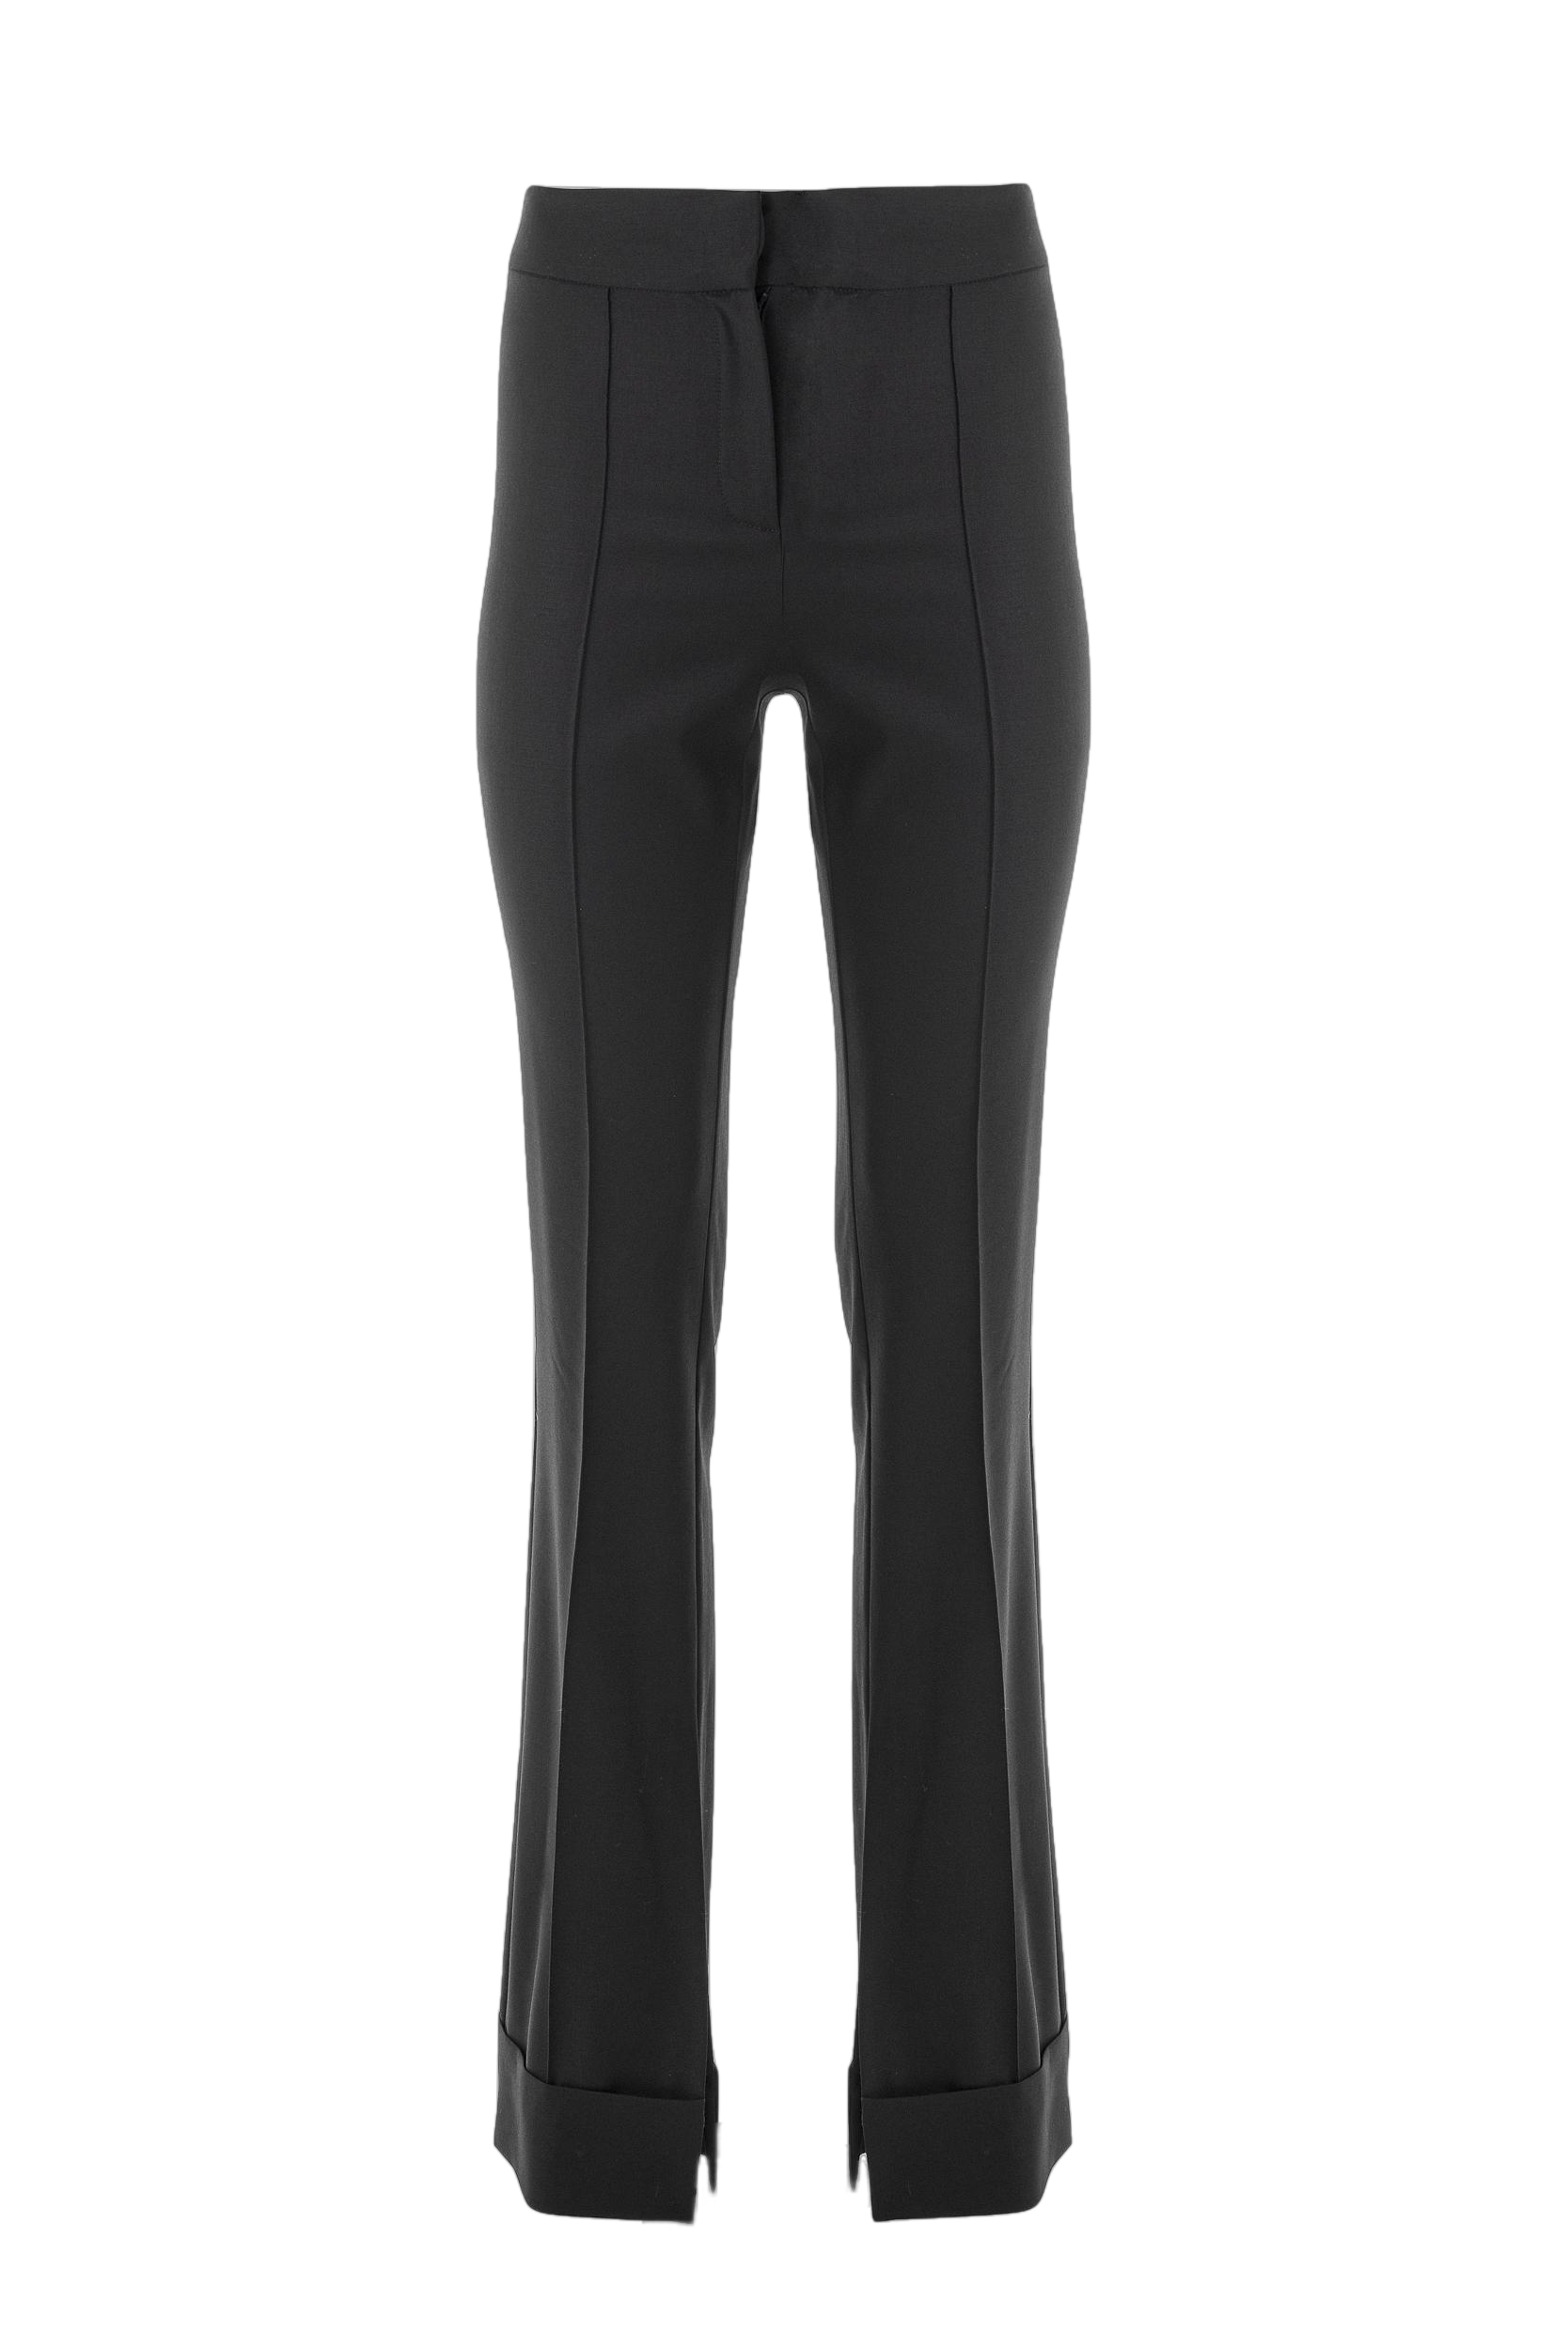 Wool straight-leg trousers with side splits in black von Lita Couture